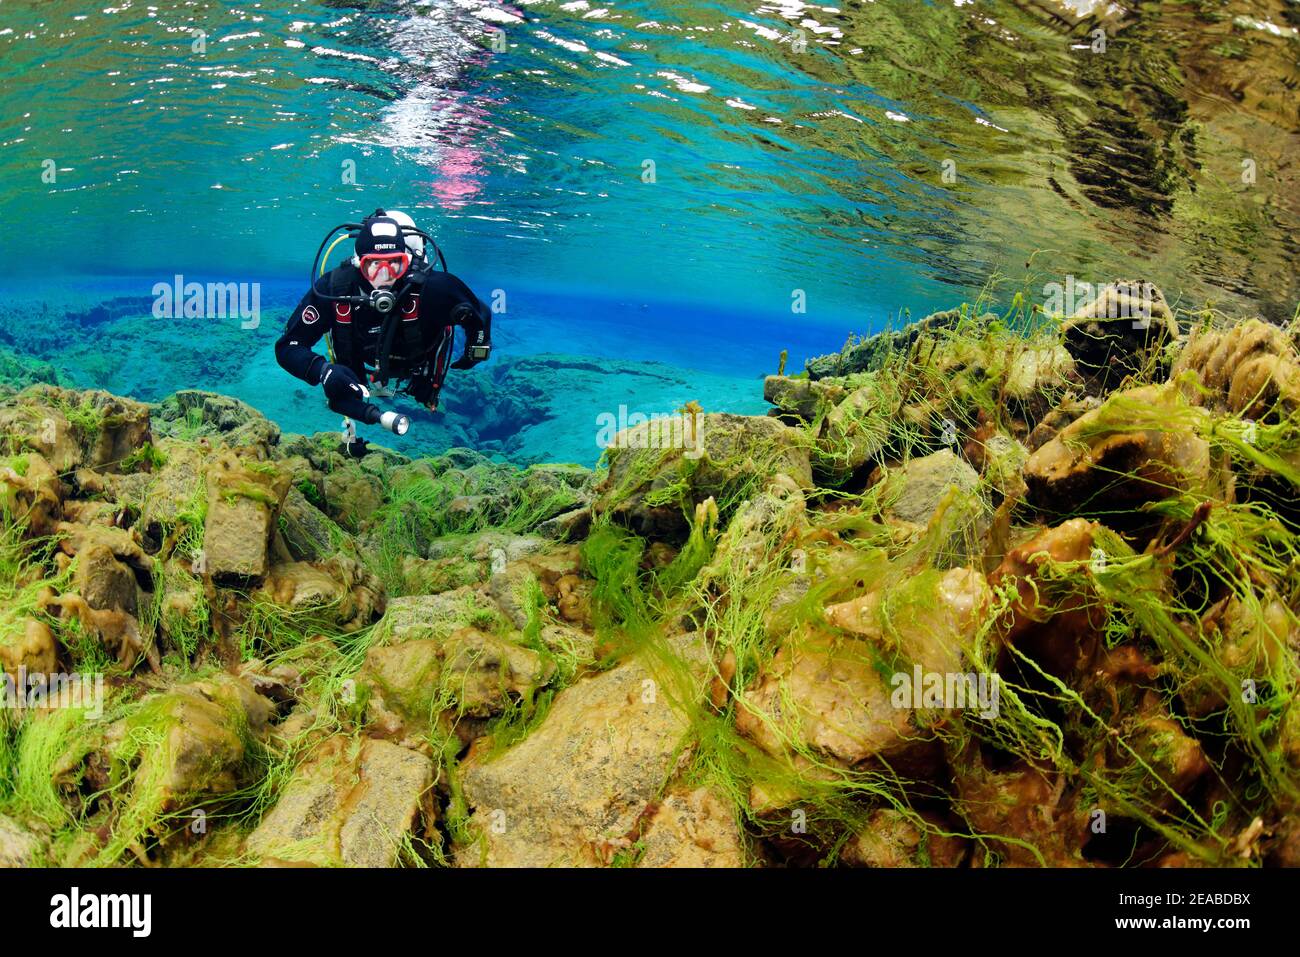 Silfra Fissure, diver in the continental fissure Silfra, diving between the continents, Thingvellir National Park, Iceland Silfra is a fissure, part of the diverging tectonic boundary between the North American and Eurasian plates Stock Photo